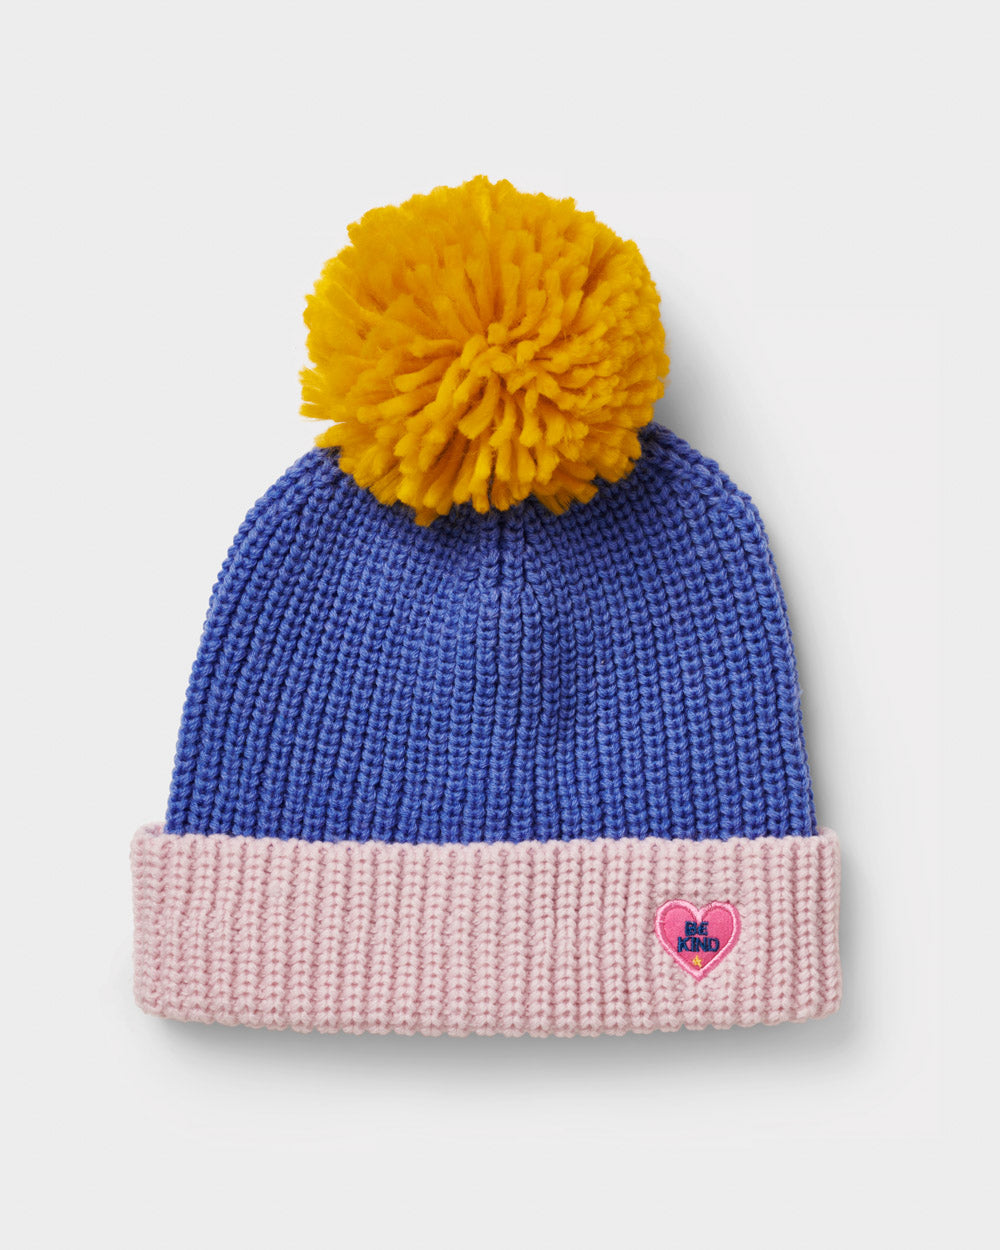 Ribbed Knit Yellow Pom Beanie - Small Stuff Accessories